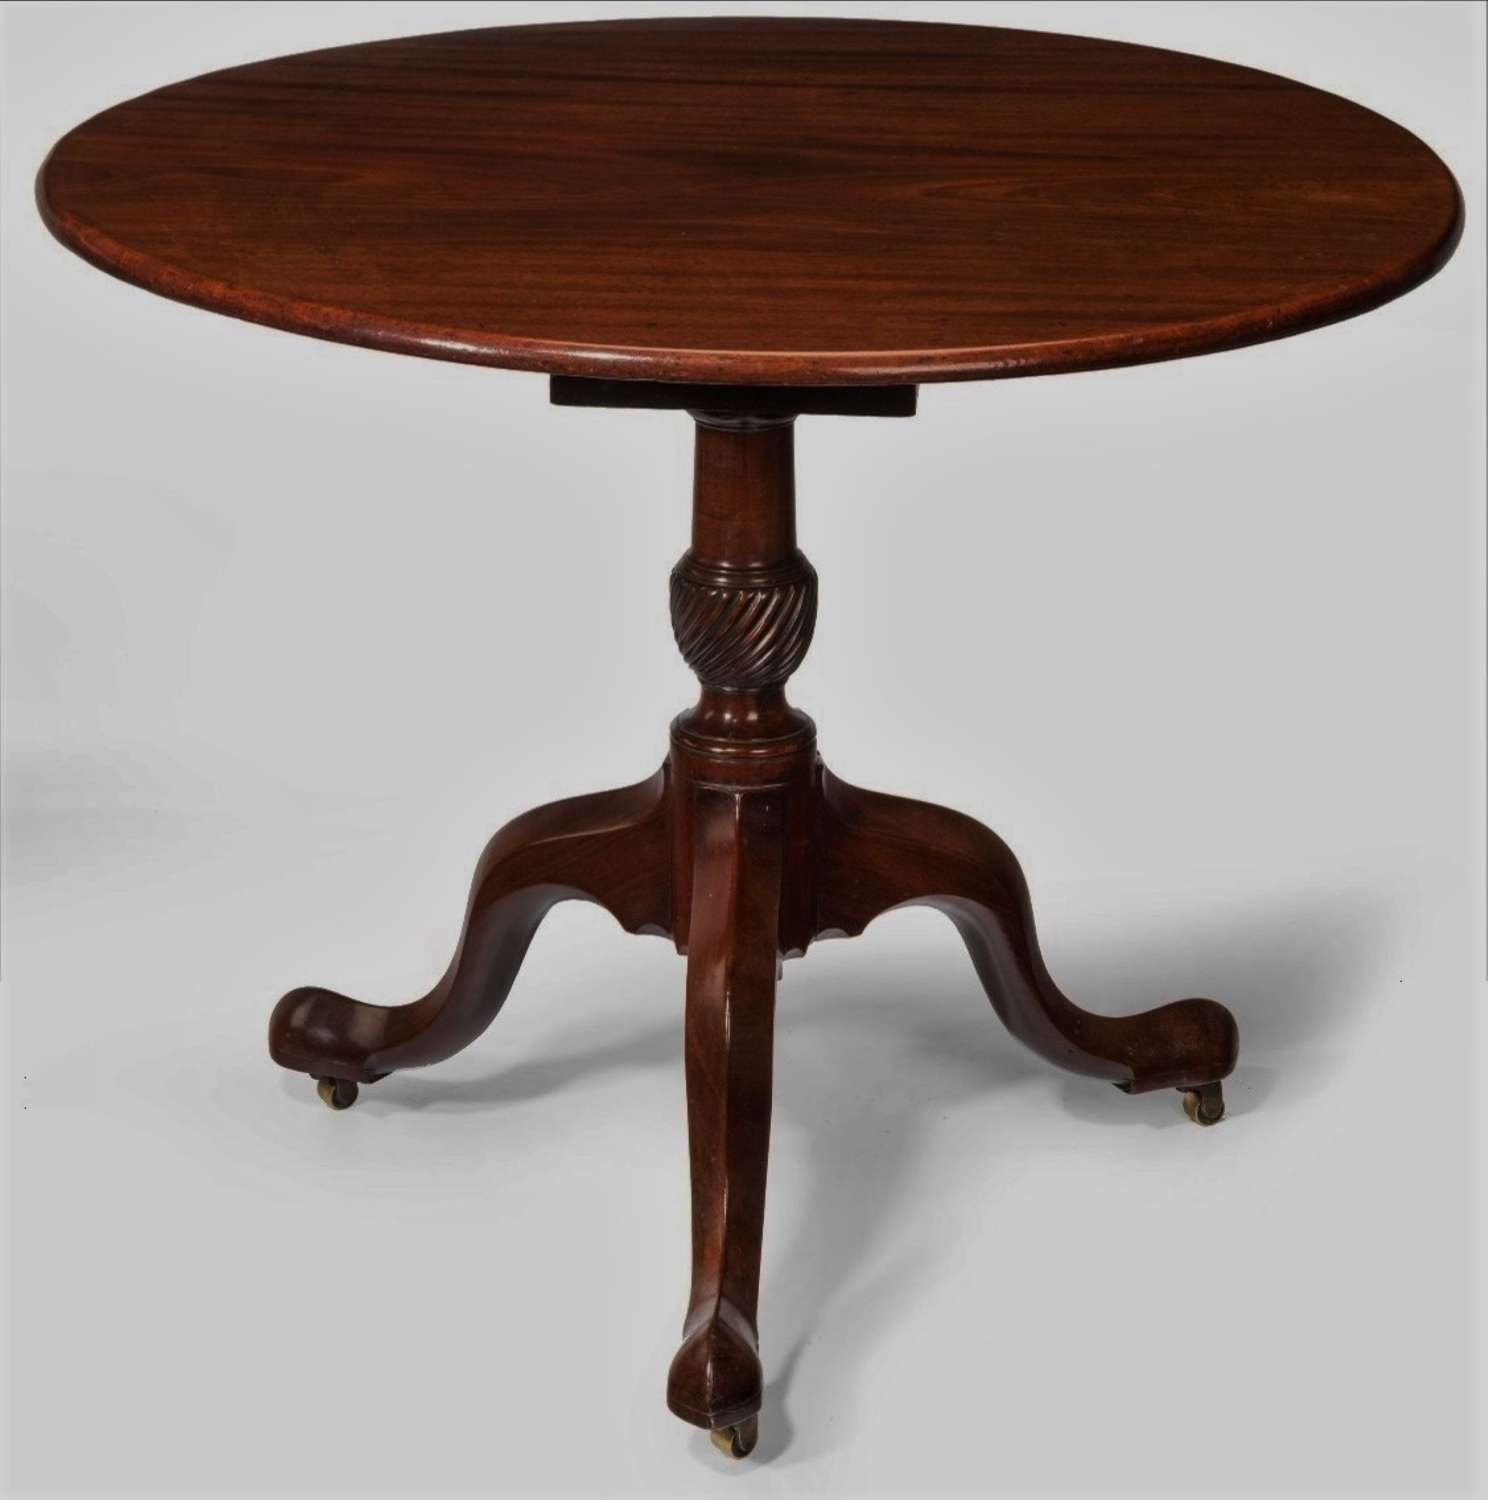 Good George III mahogany tripod supper table / centre table